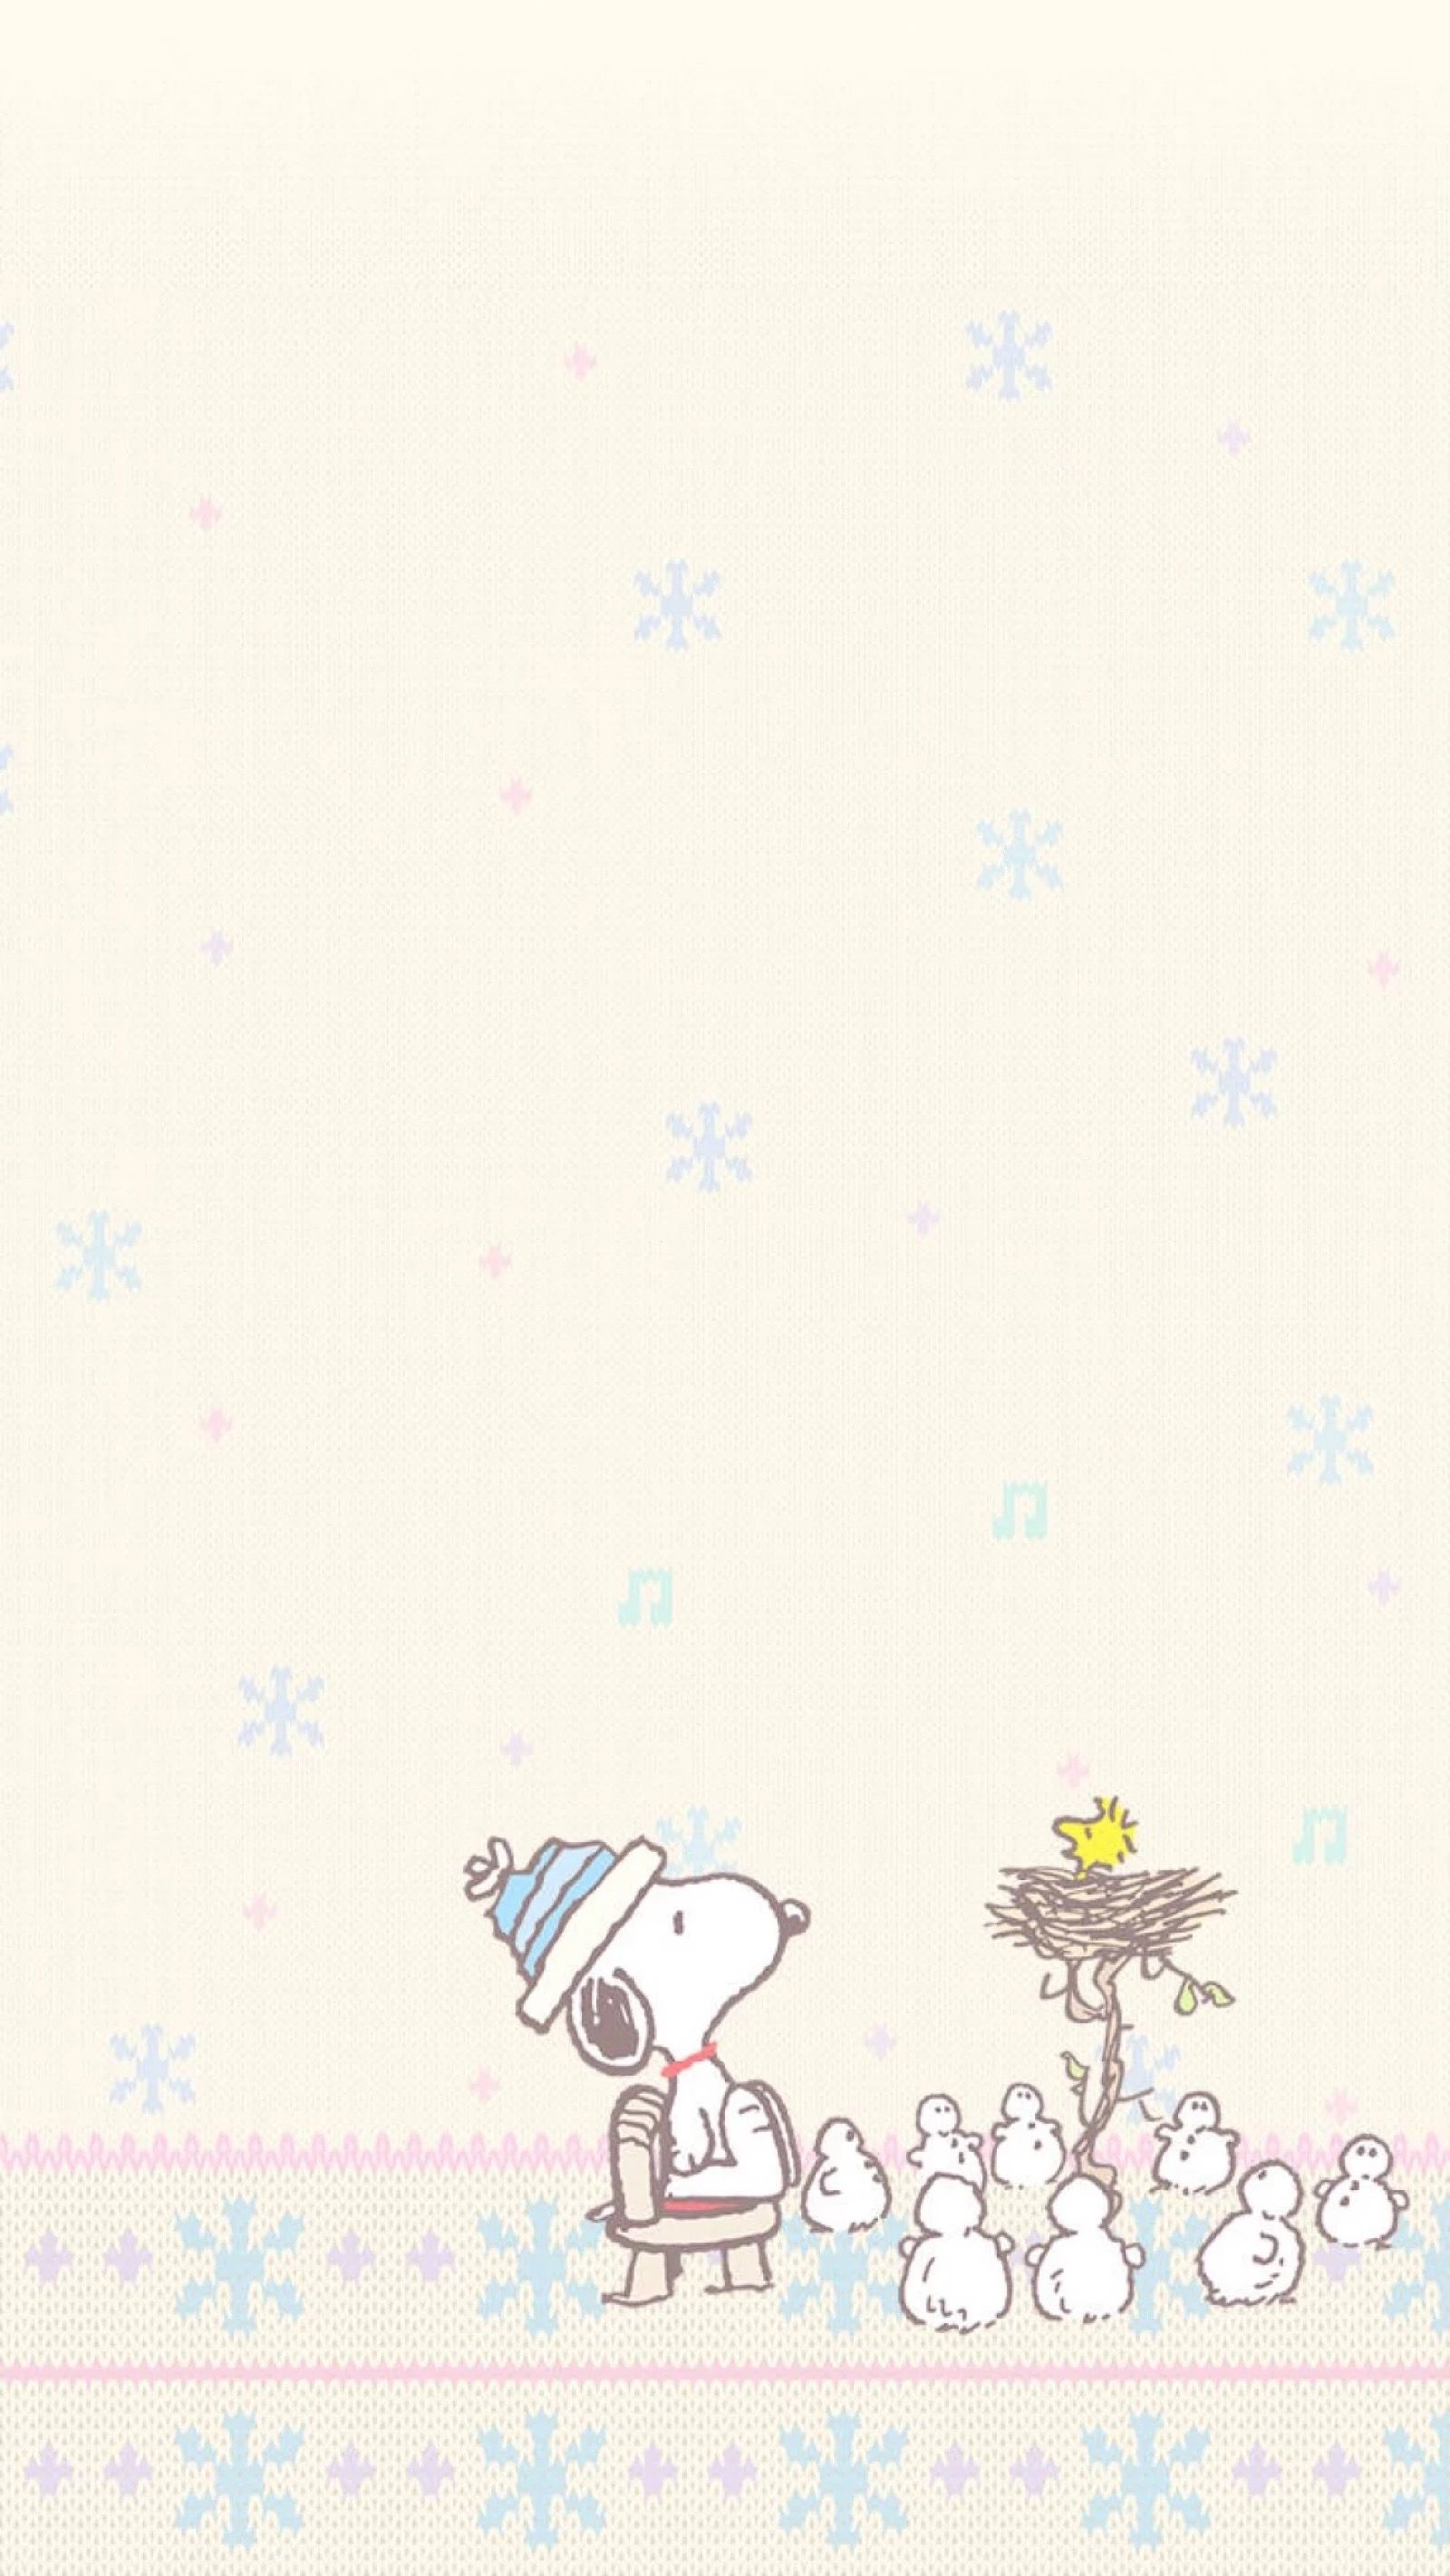 1600x2843 Pin by Pankeaw&agrave;&cedil;&#155;&agrave;&sup1;&#136;&agrave;&cedil;&sup2;&agrave;&cedil;&#153;&agrave;&sup1;&#129;&agrave;&cedil;&#129;&agrave;&sup1;&#137;&agrave;&cedil;&sect; on Wallpaper sanrio | Snoopy wallpaper, Snoopy pictures, Snoopy images